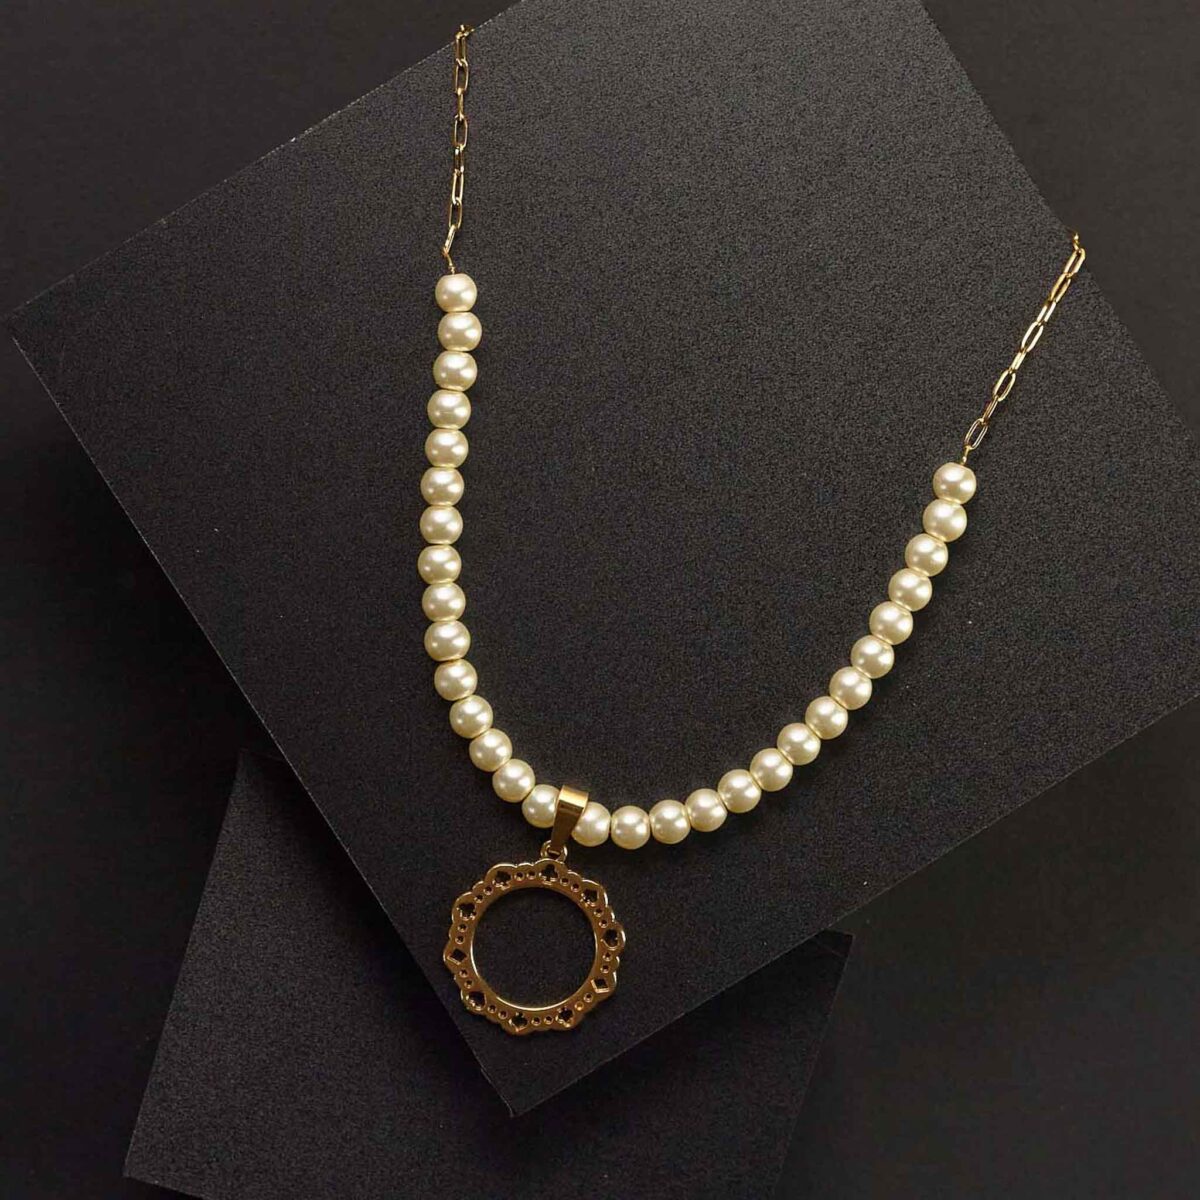 Necklace With White Pearls And Round Metallic Pattern In Gold